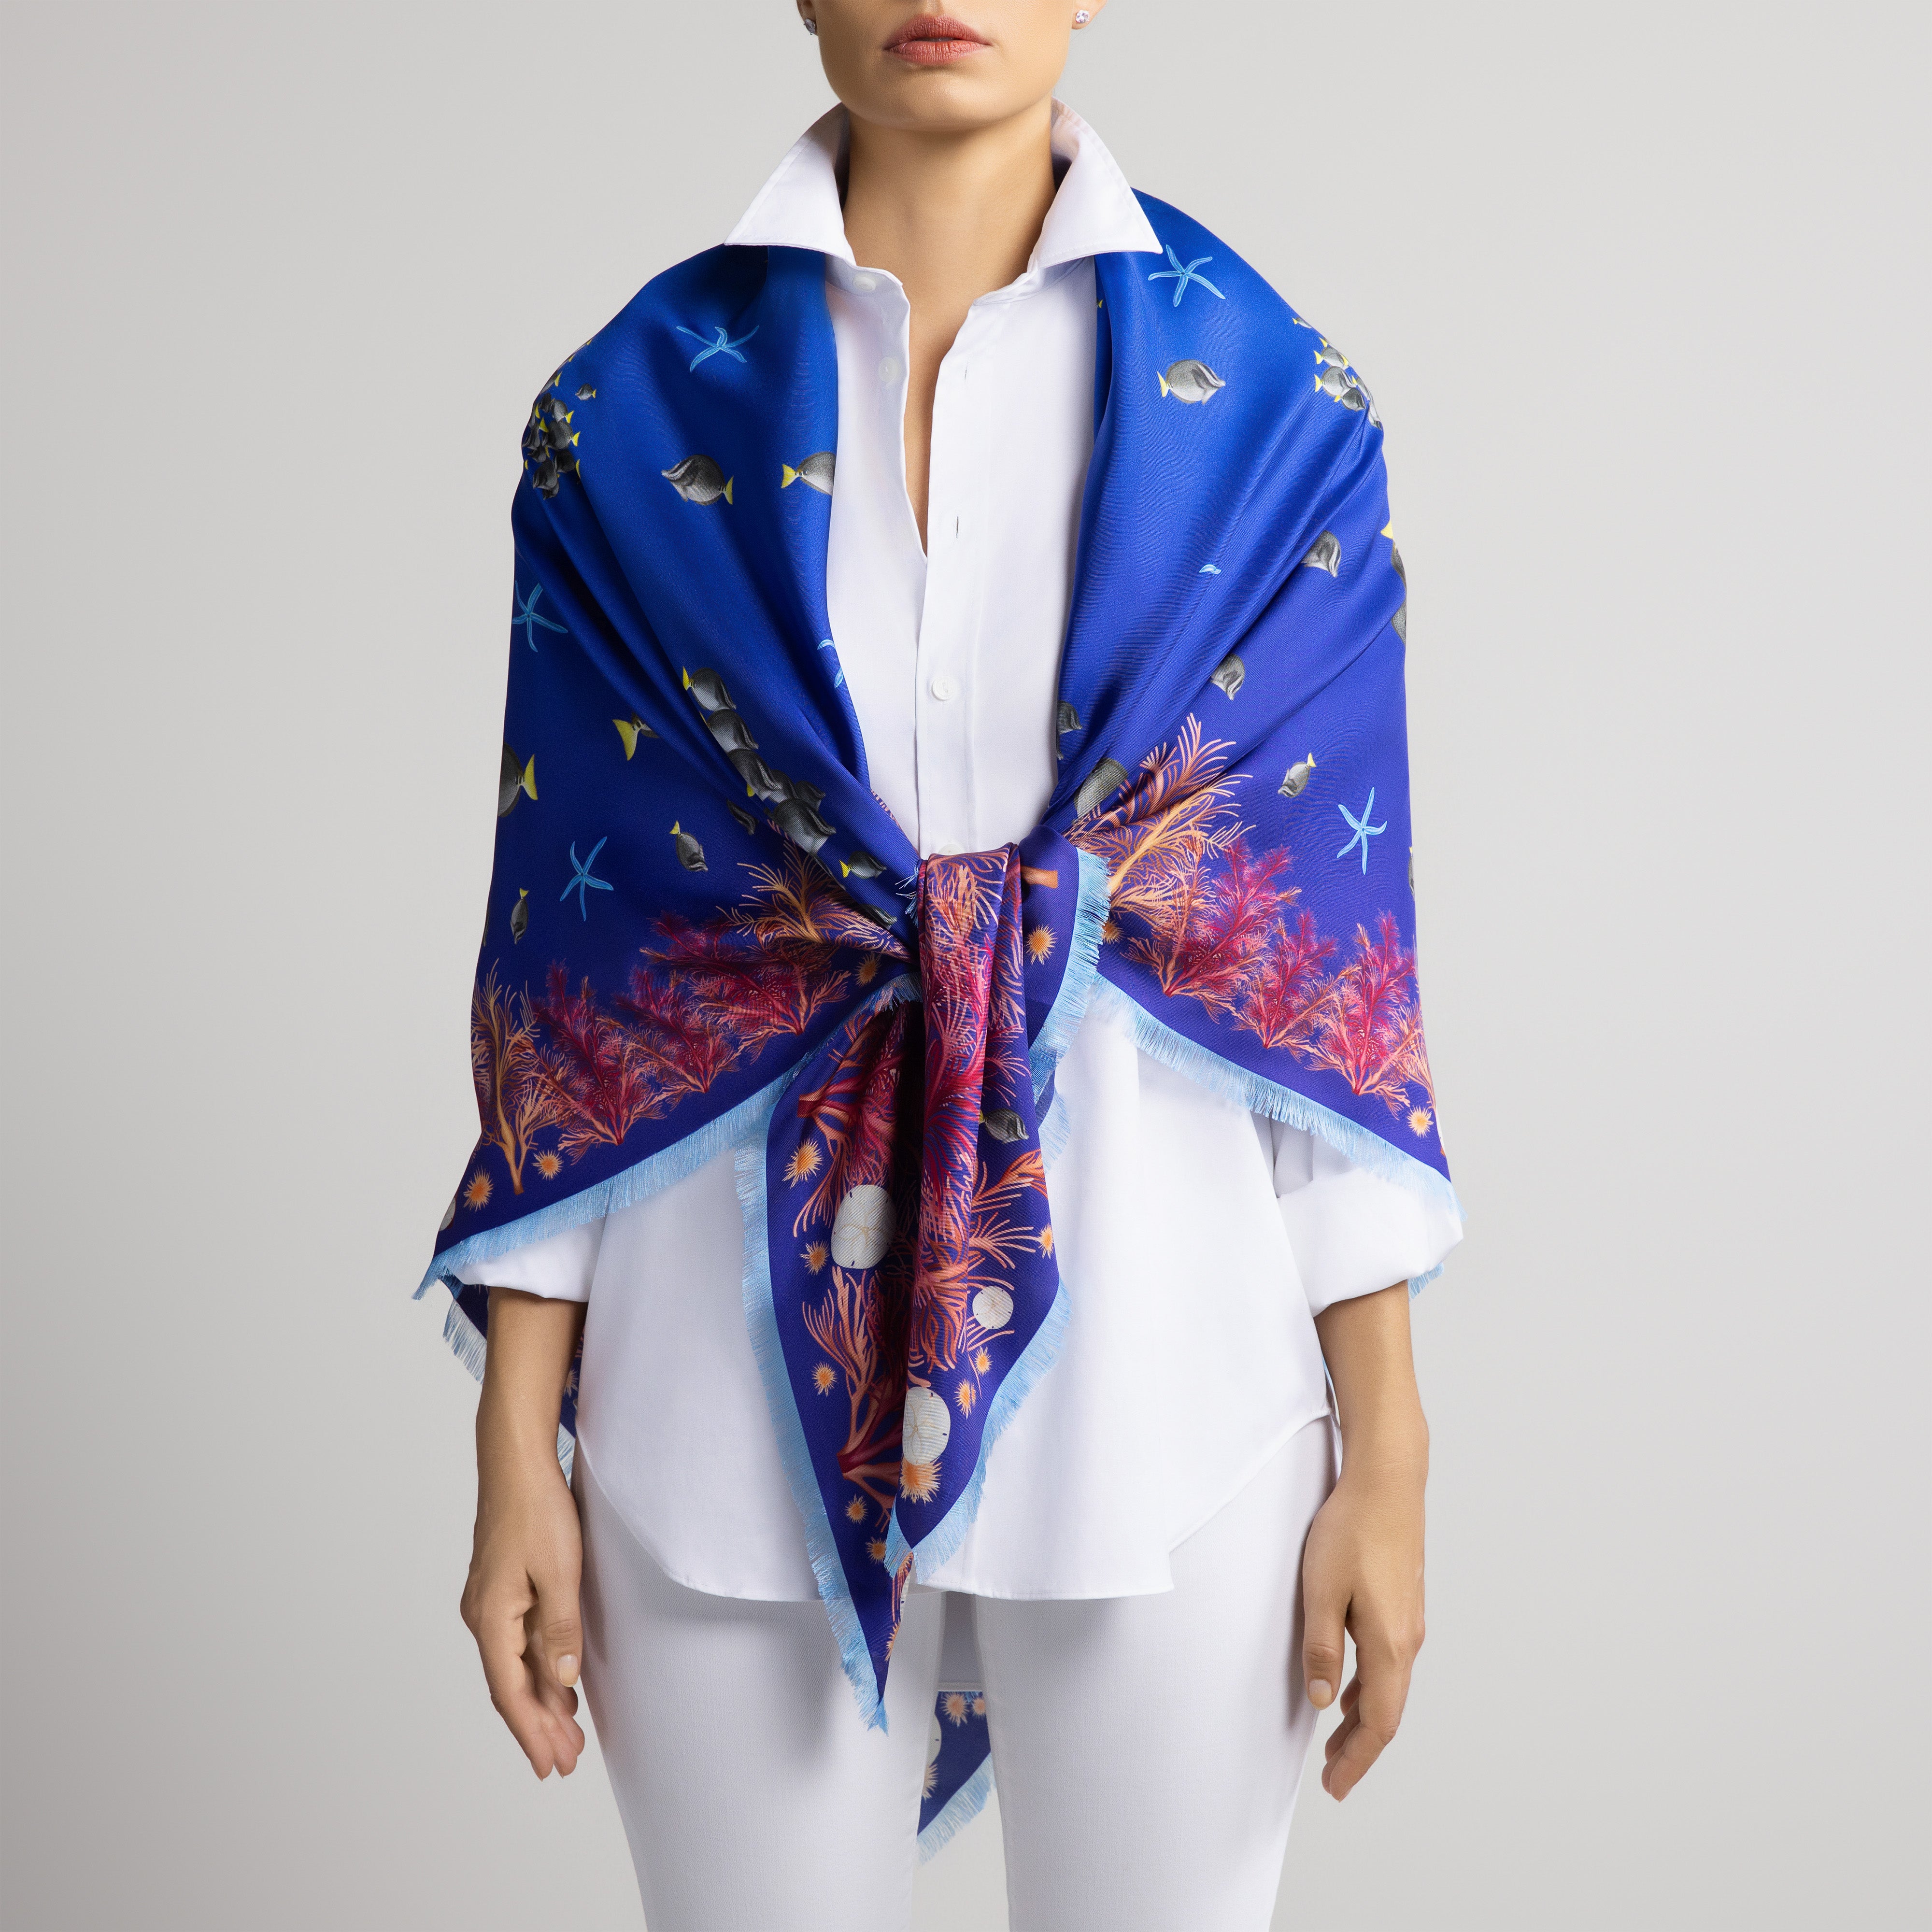 Galapagos Grande Silk Scarf in Blue Ombré with Hand-Feathered Edges